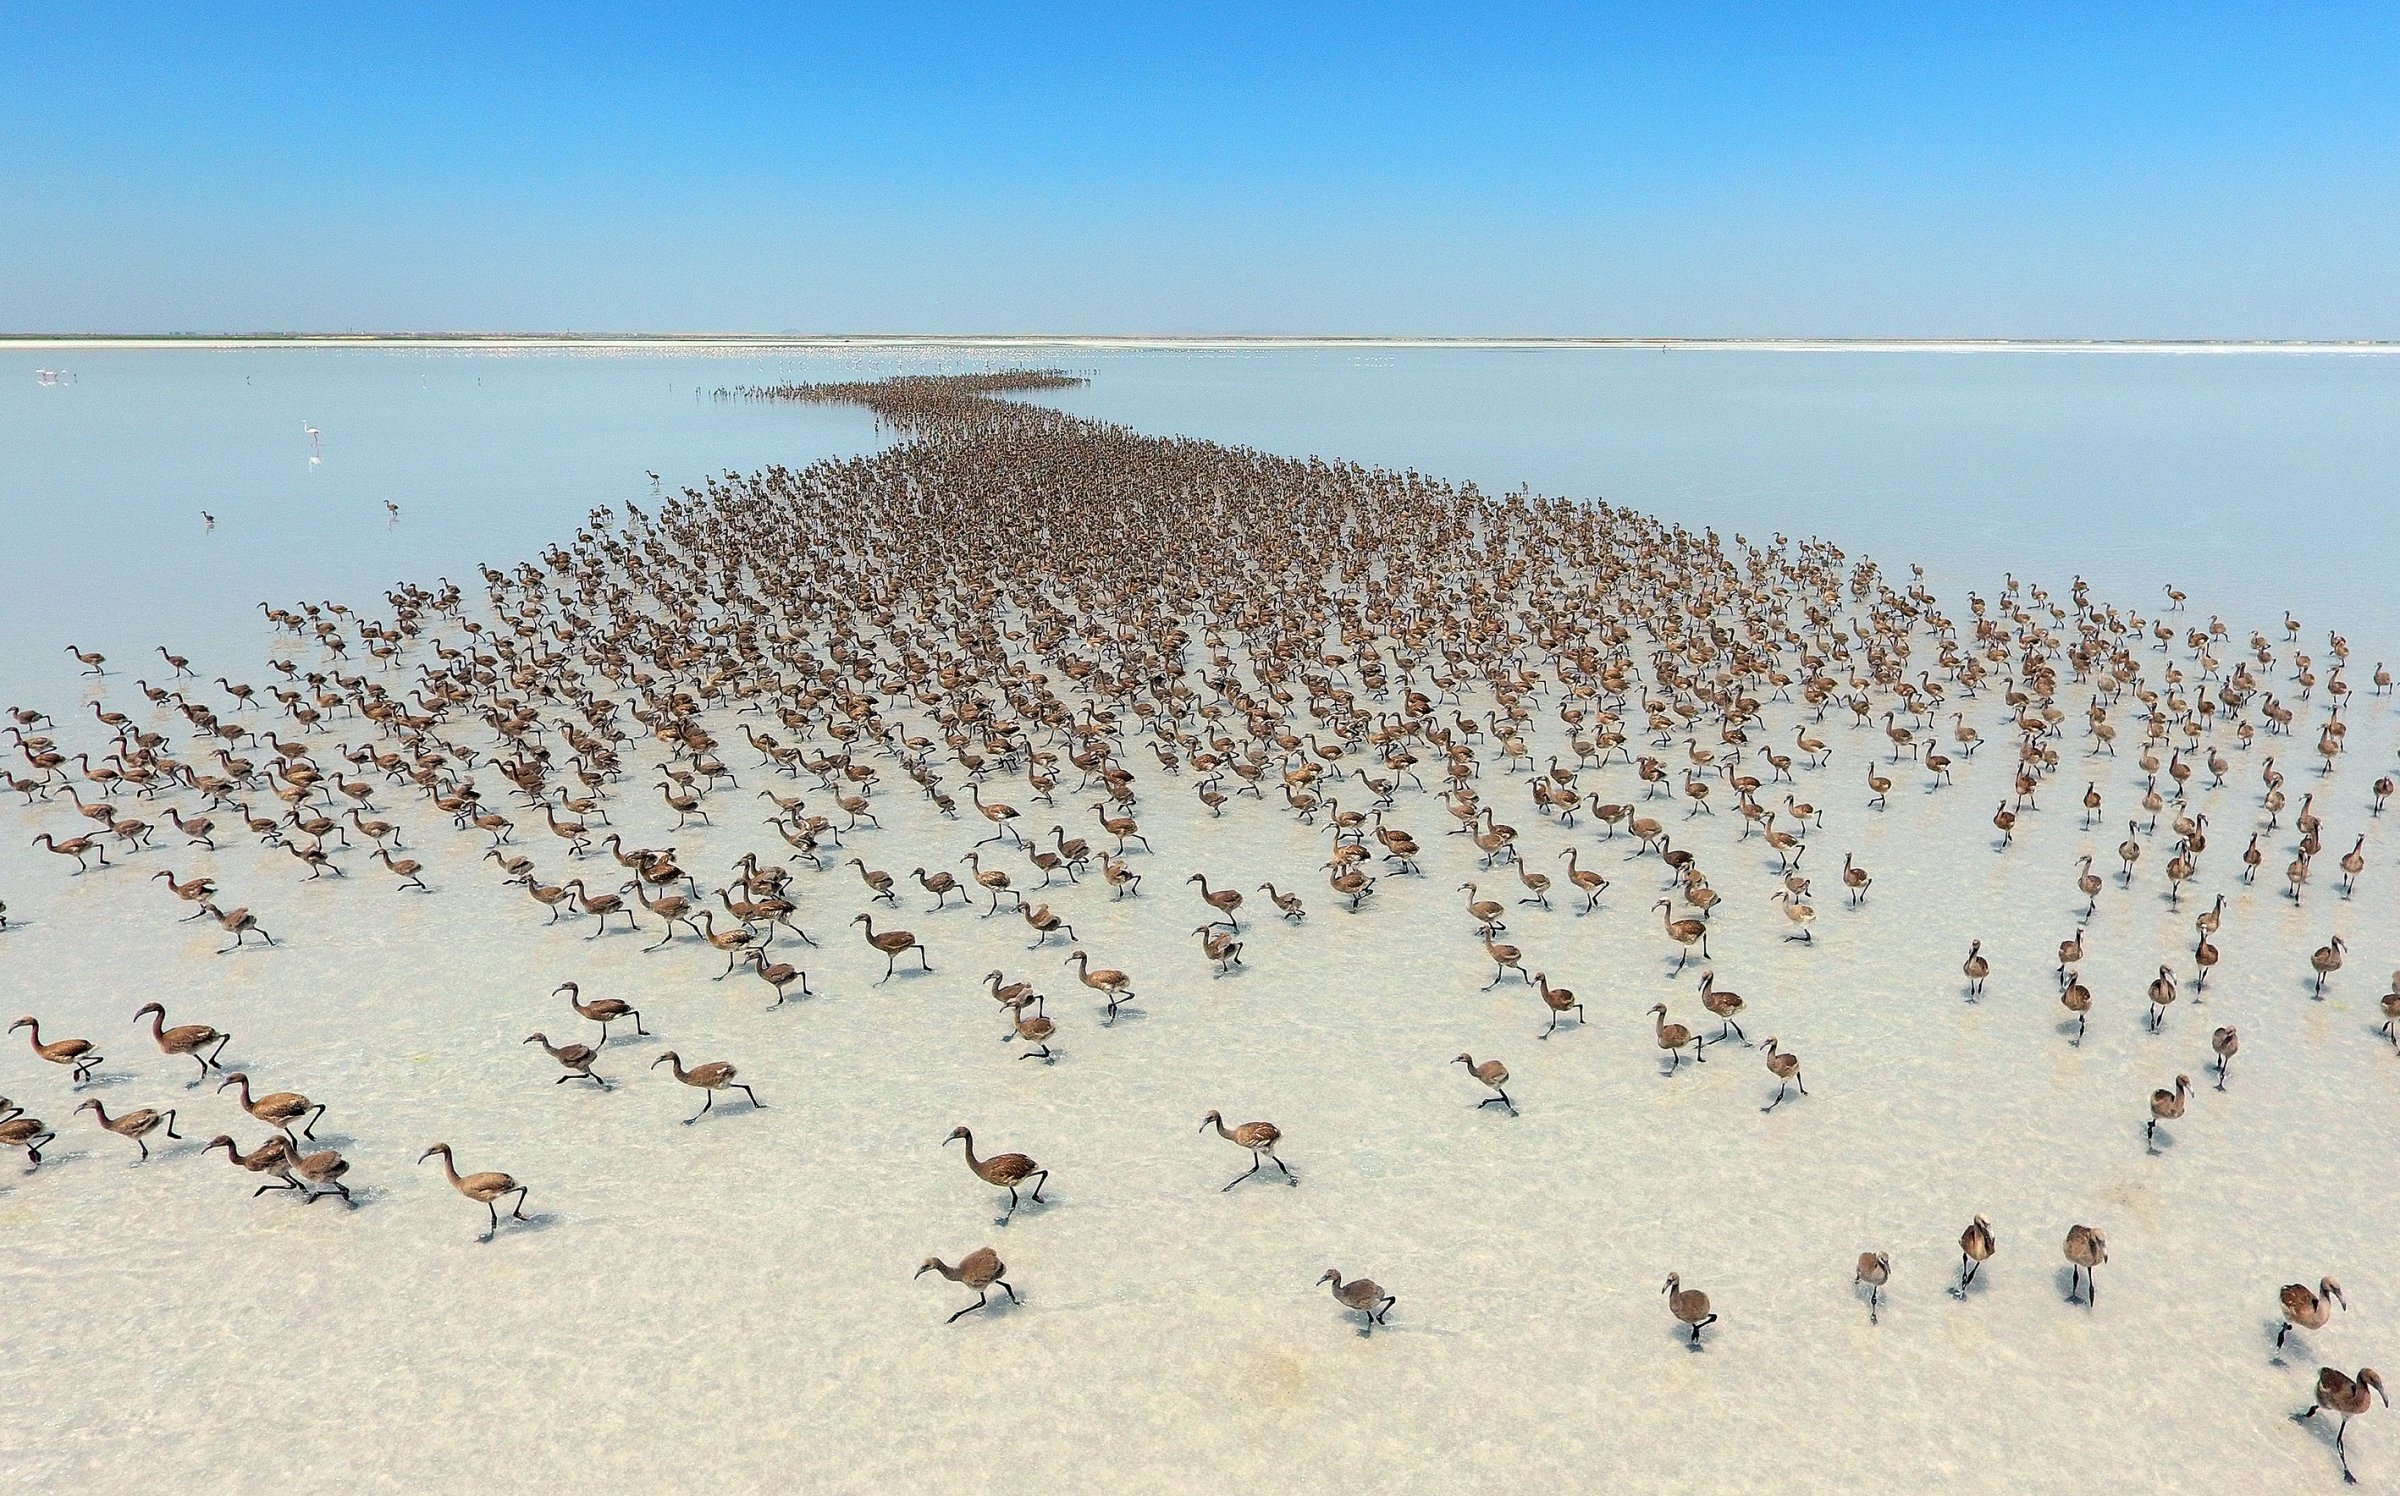 Flamingos are seen after thousands of flamingo chicks have emerged from their nests at Lake Tuz in Turkey on June 28, 2016.